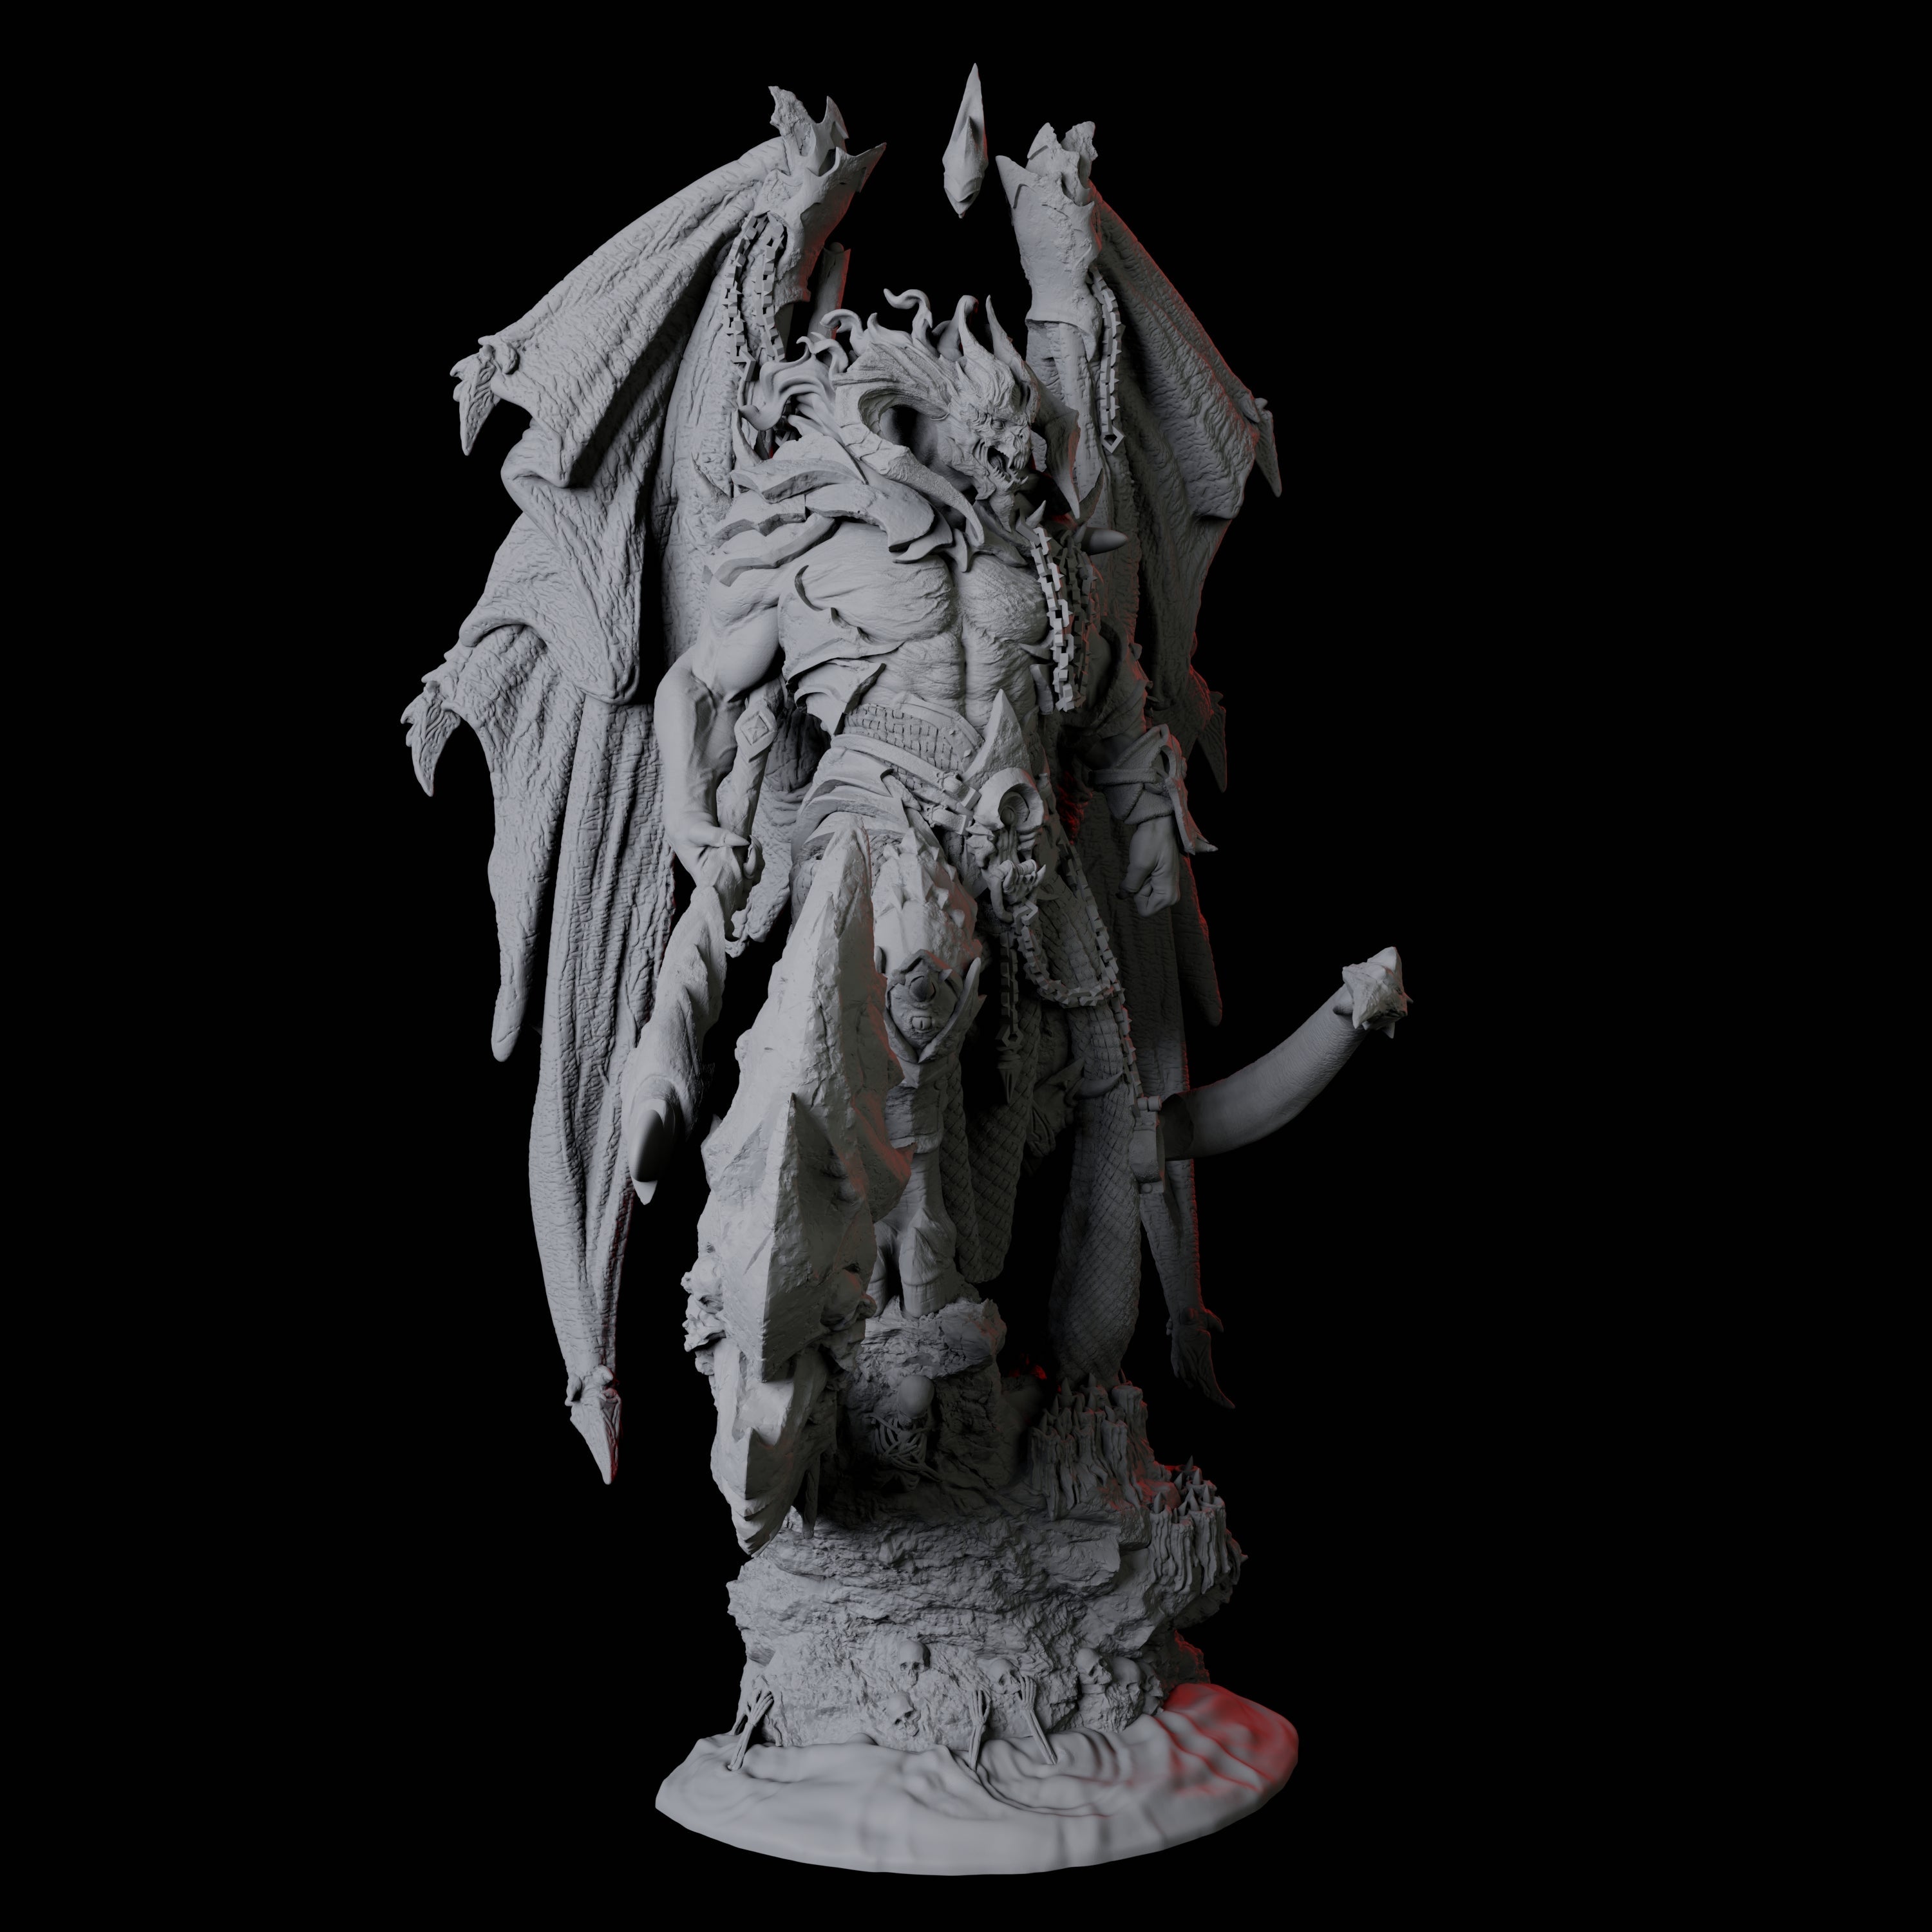 Hulking Pit Fiend Miniature for Dungeons and Dragons, Pathfinder or other TTRPGs